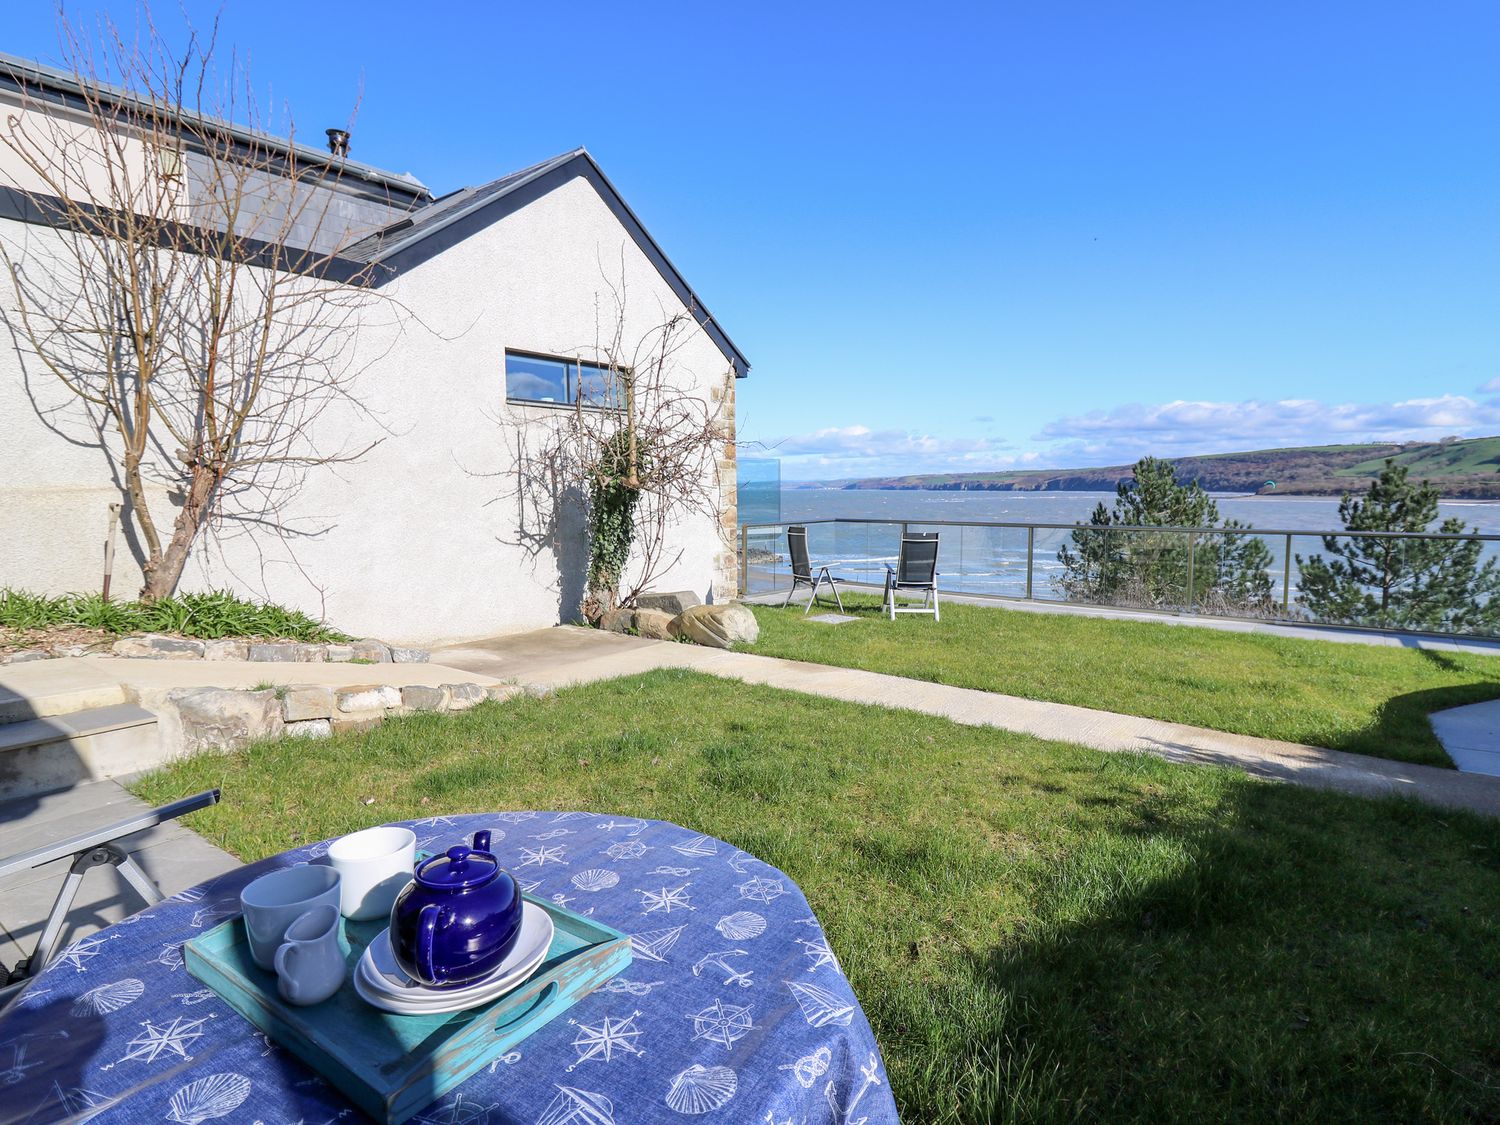 Fronwig is located in New Quay, Ceredigion. Four-bedroom home with sea views and wood-fired hot tub.